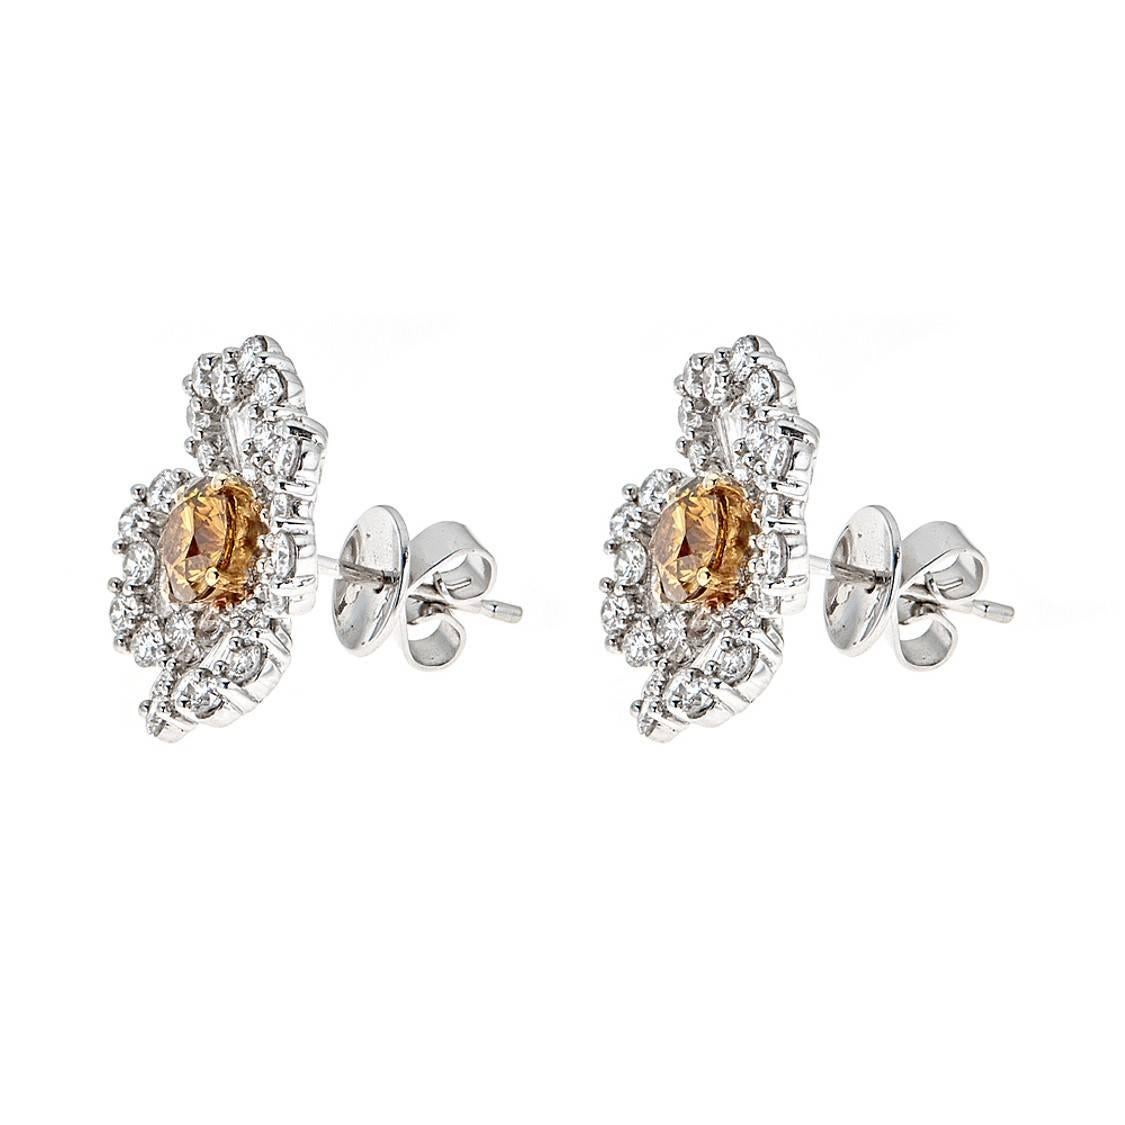 Round Cut 2.47 Carat Diamond and 1.08 Carat Brown Diamond White Gold Flower Stud Earrings For Sale